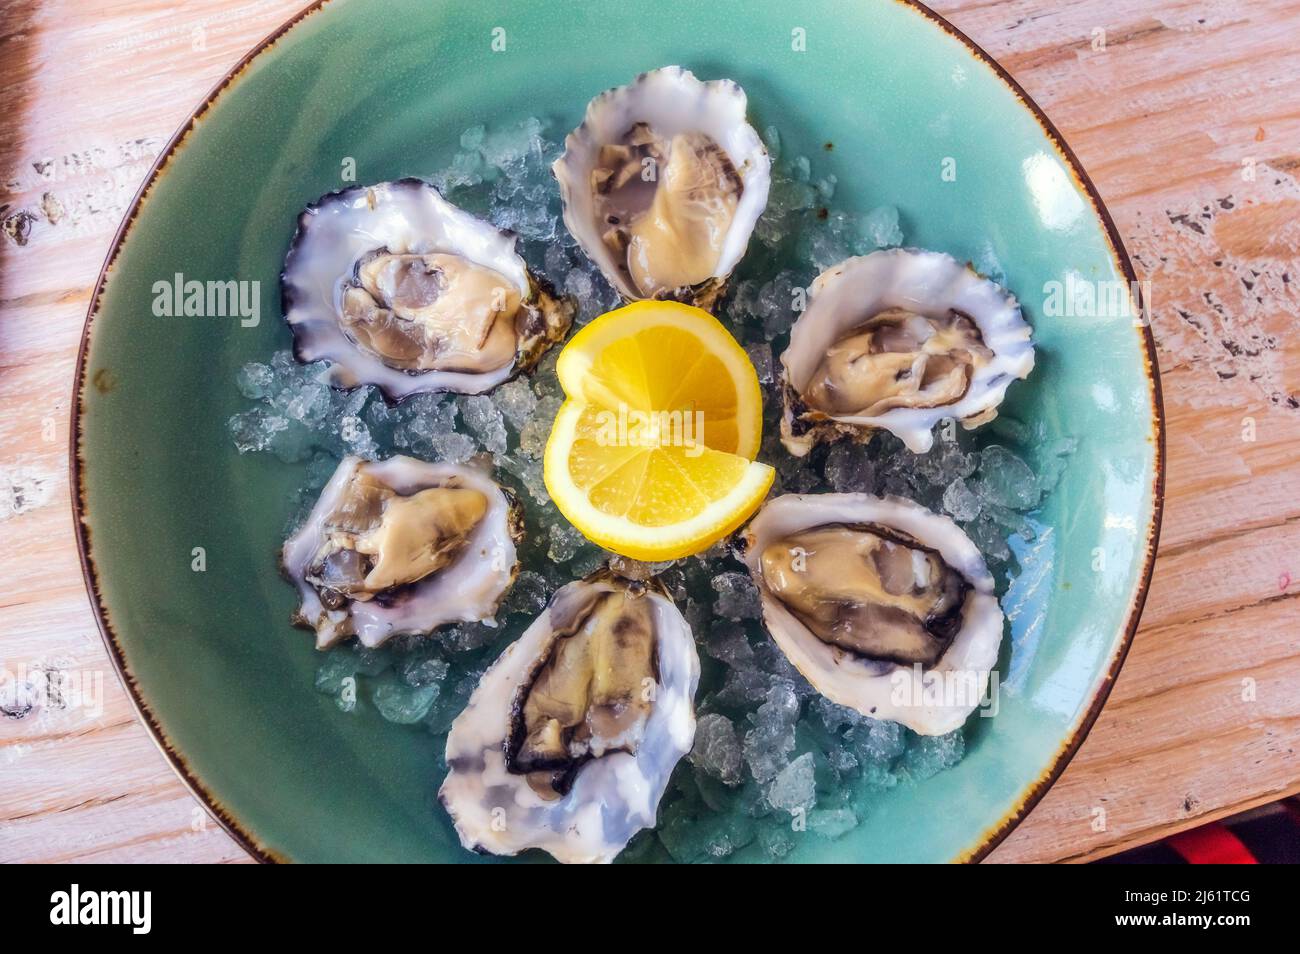 Plate of fresh ready-to-eat oysters Stock Photo